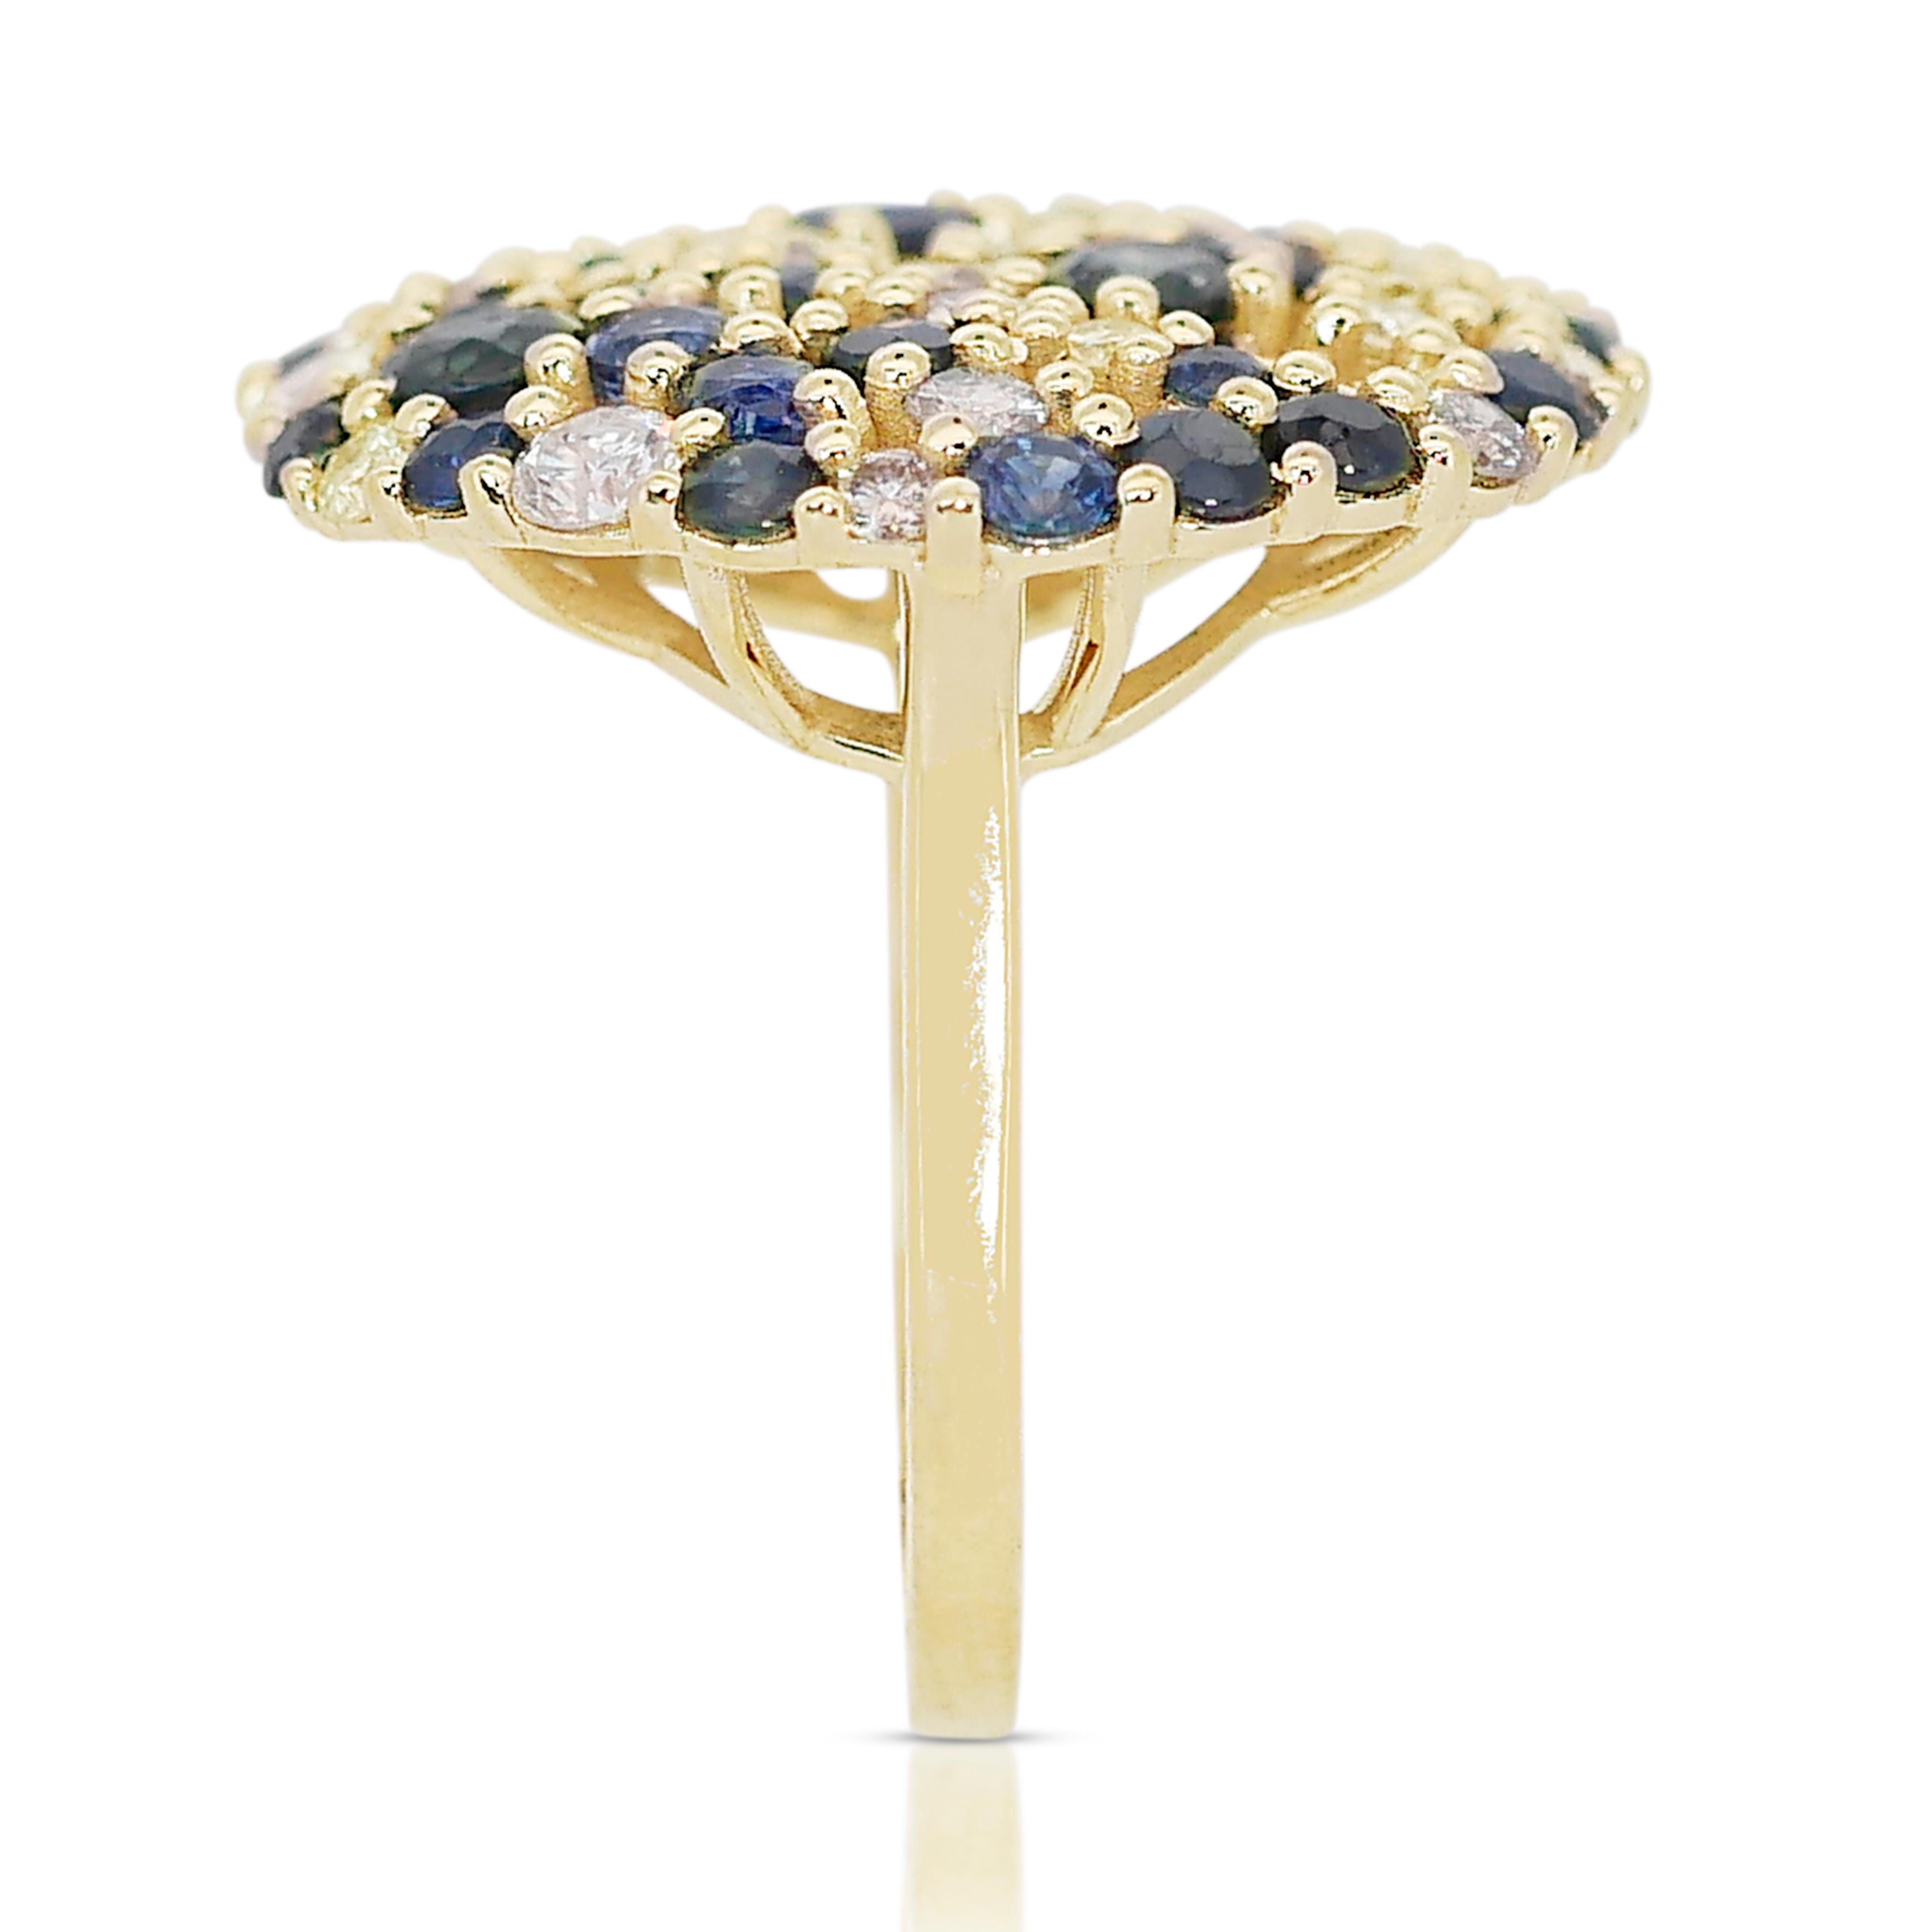 Stunning 14k Yellow Gold Sapphire and Diamond Halo Ring w/4.39 ct -AIG Certified For Sale 3